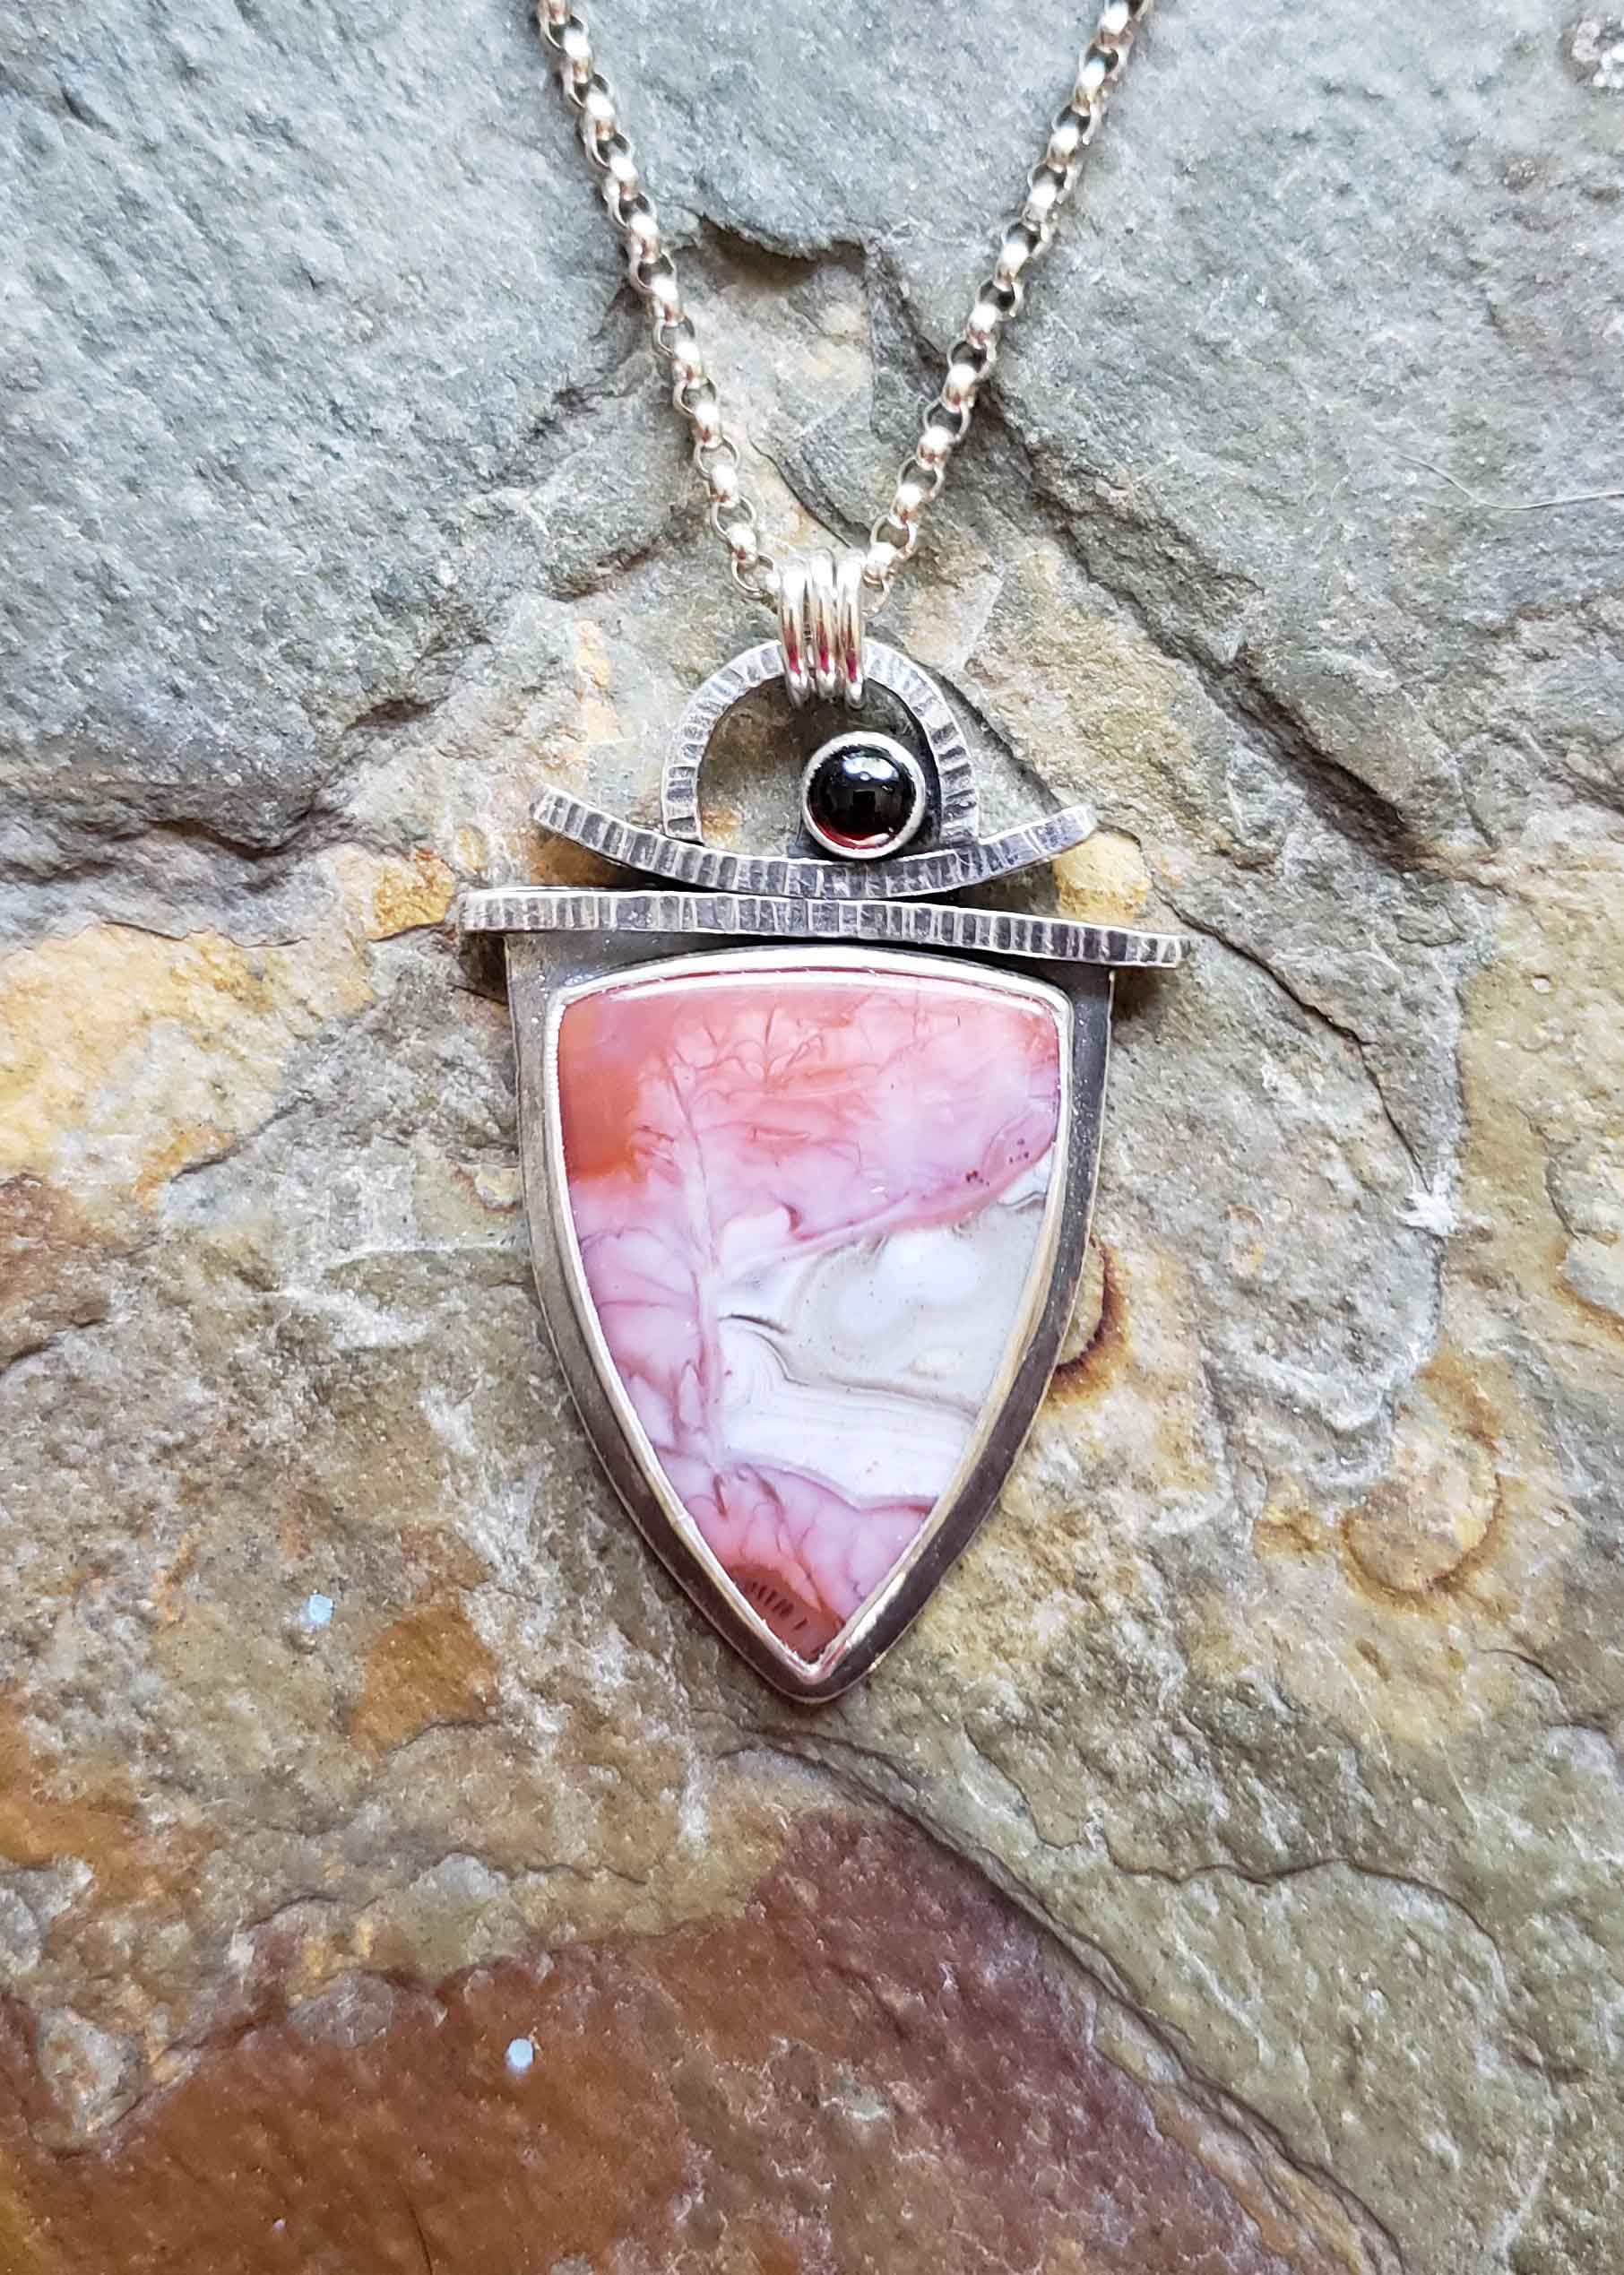 Reds, pinks and cream silver pendant by Dona Miller.